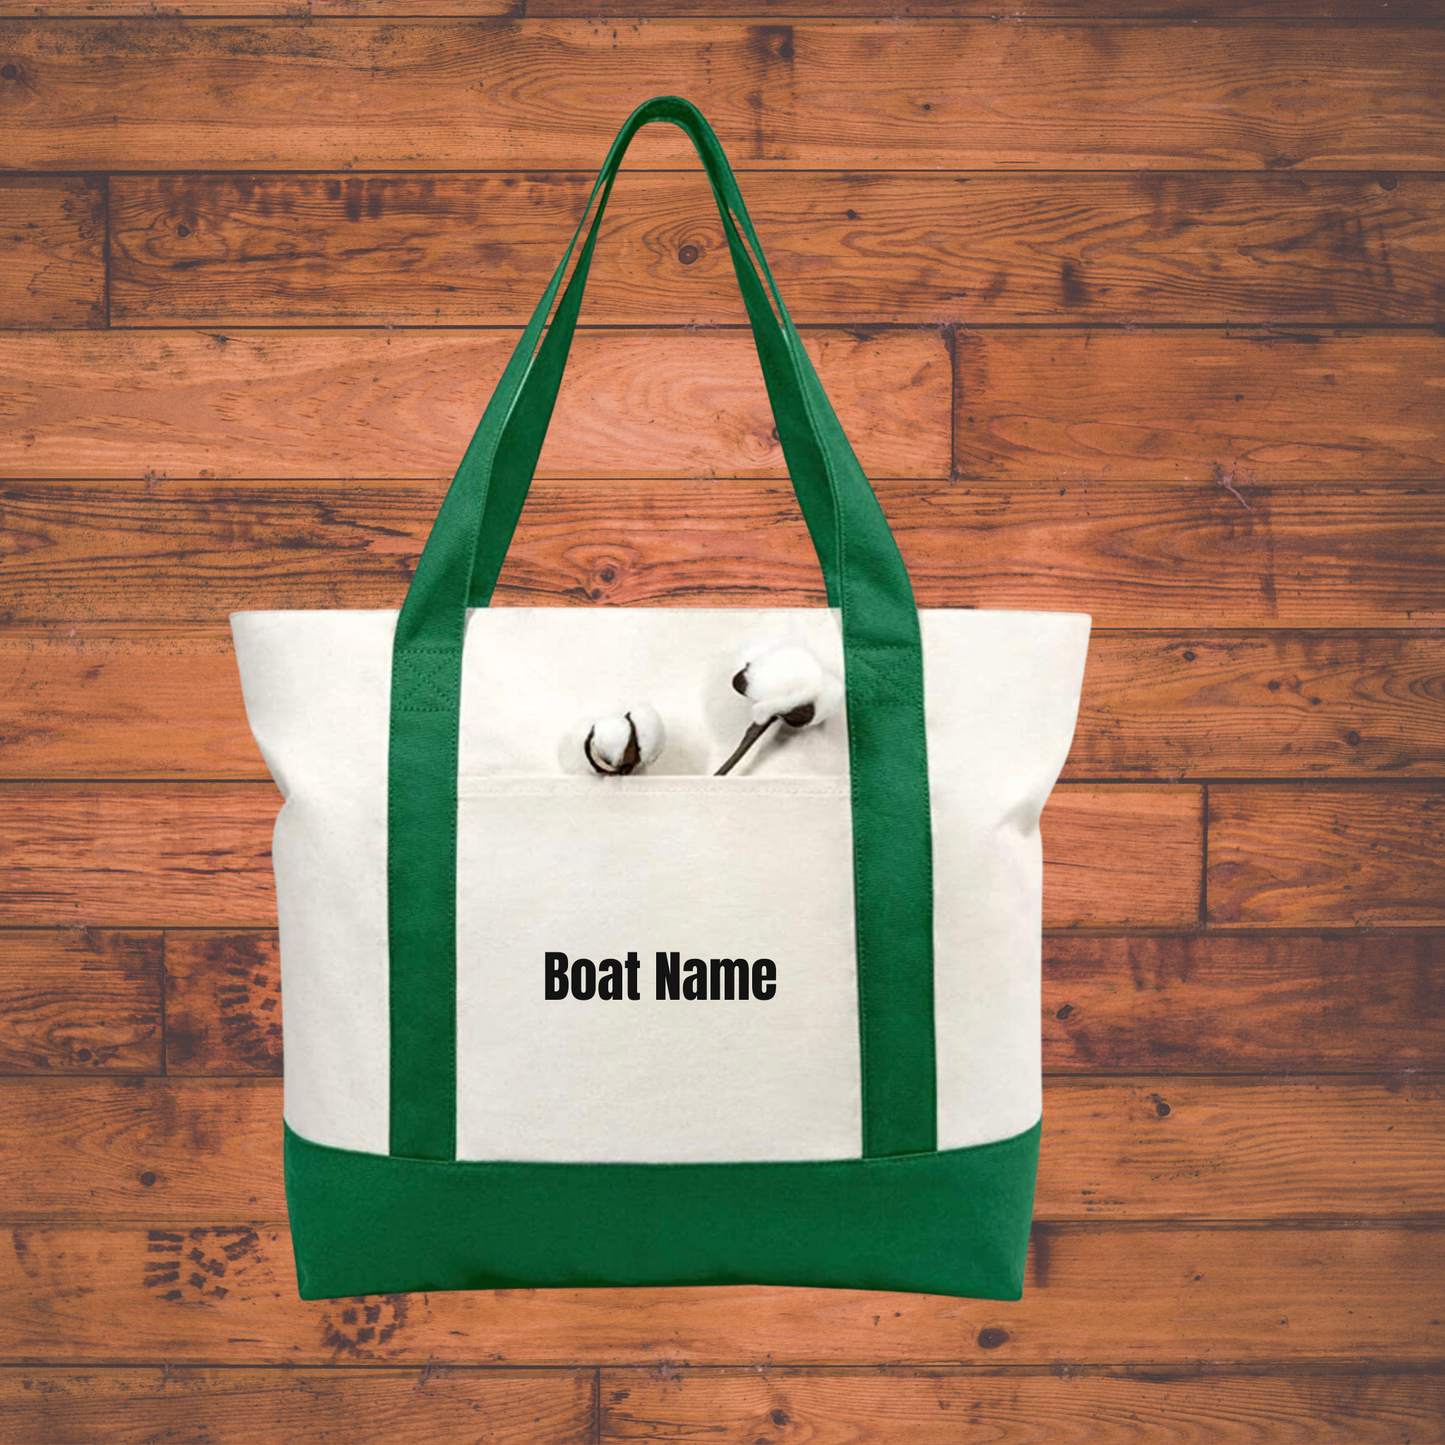 Personalized canvas boat shopping bag